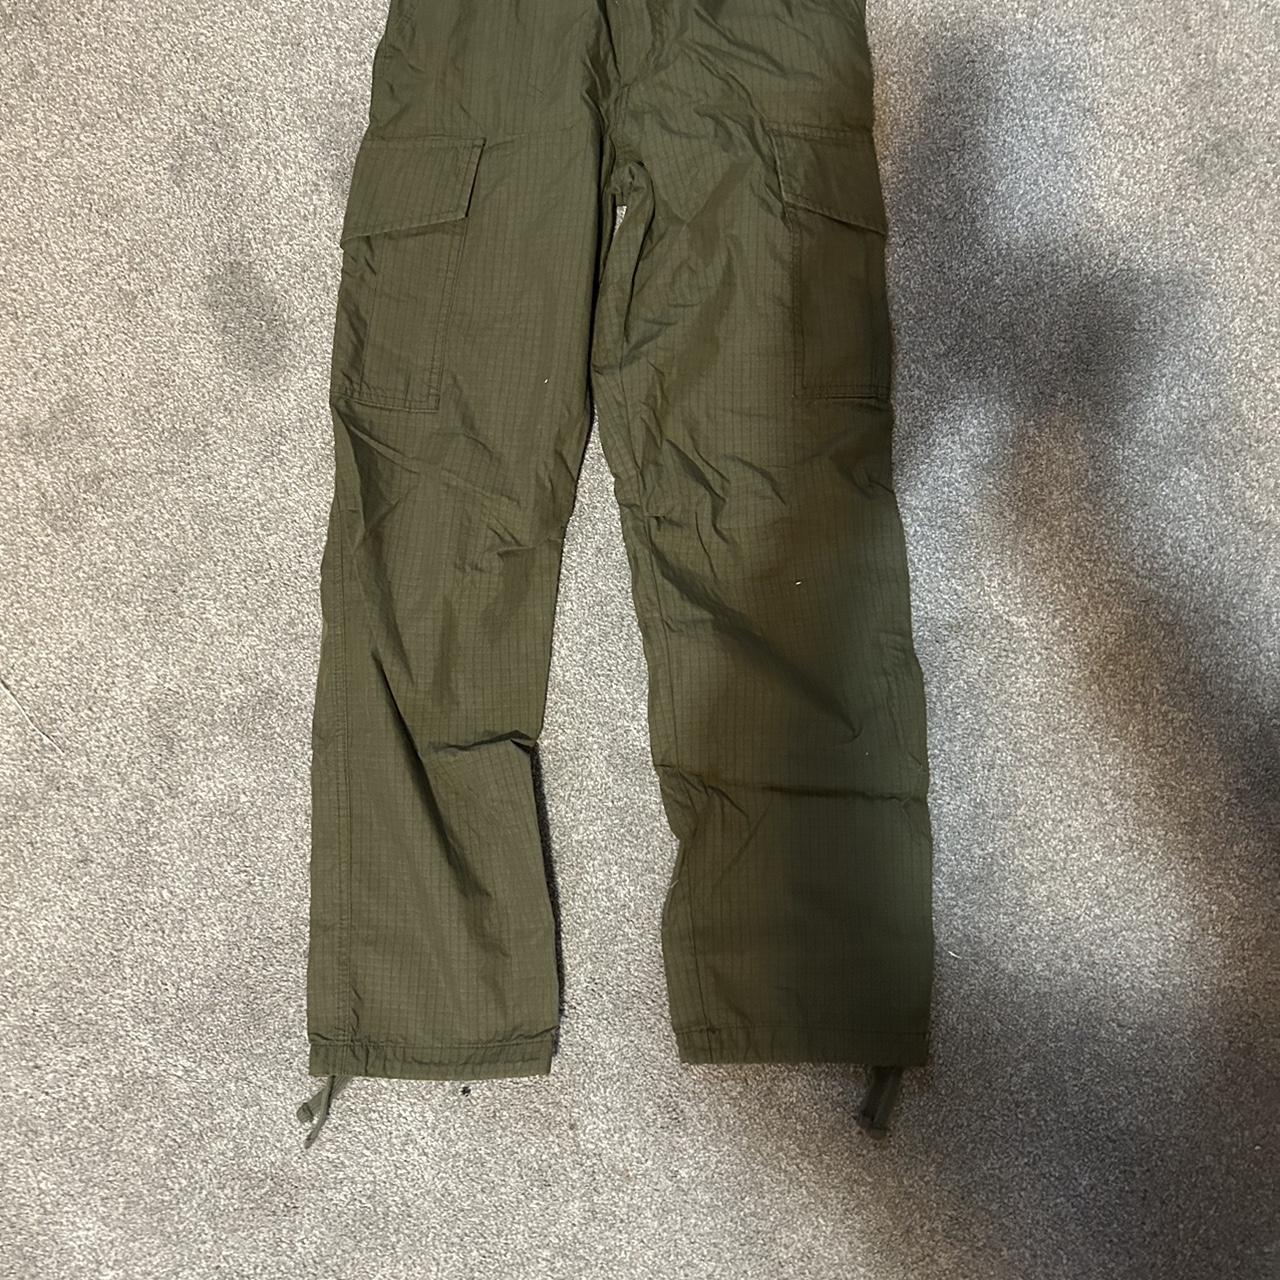 Bogs Men's Green and Khaki Trousers